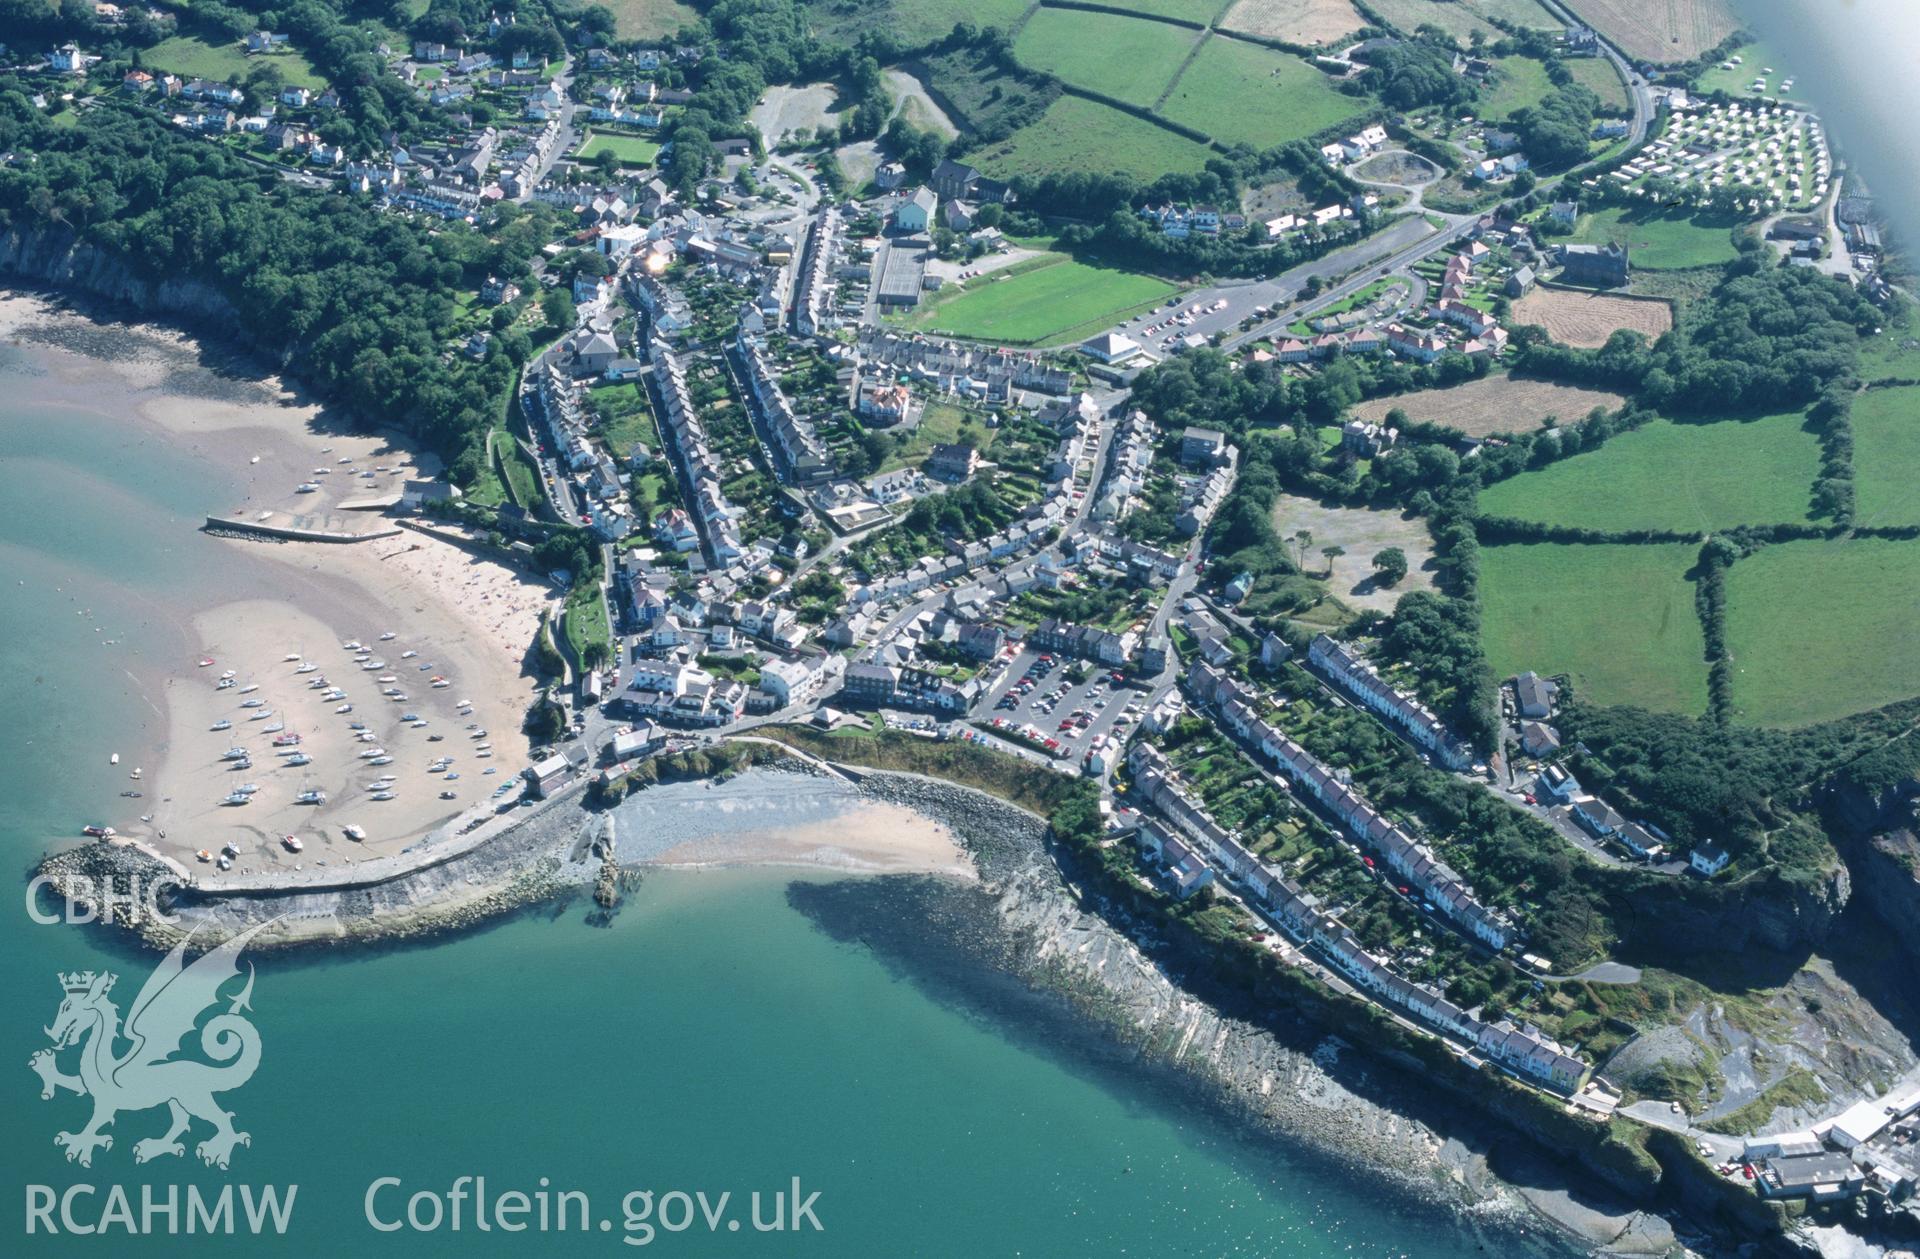 Slide of RCAHMW colour oblique aerial photograph of New Quay, taken by T.G. Driver, 17/7/2000.